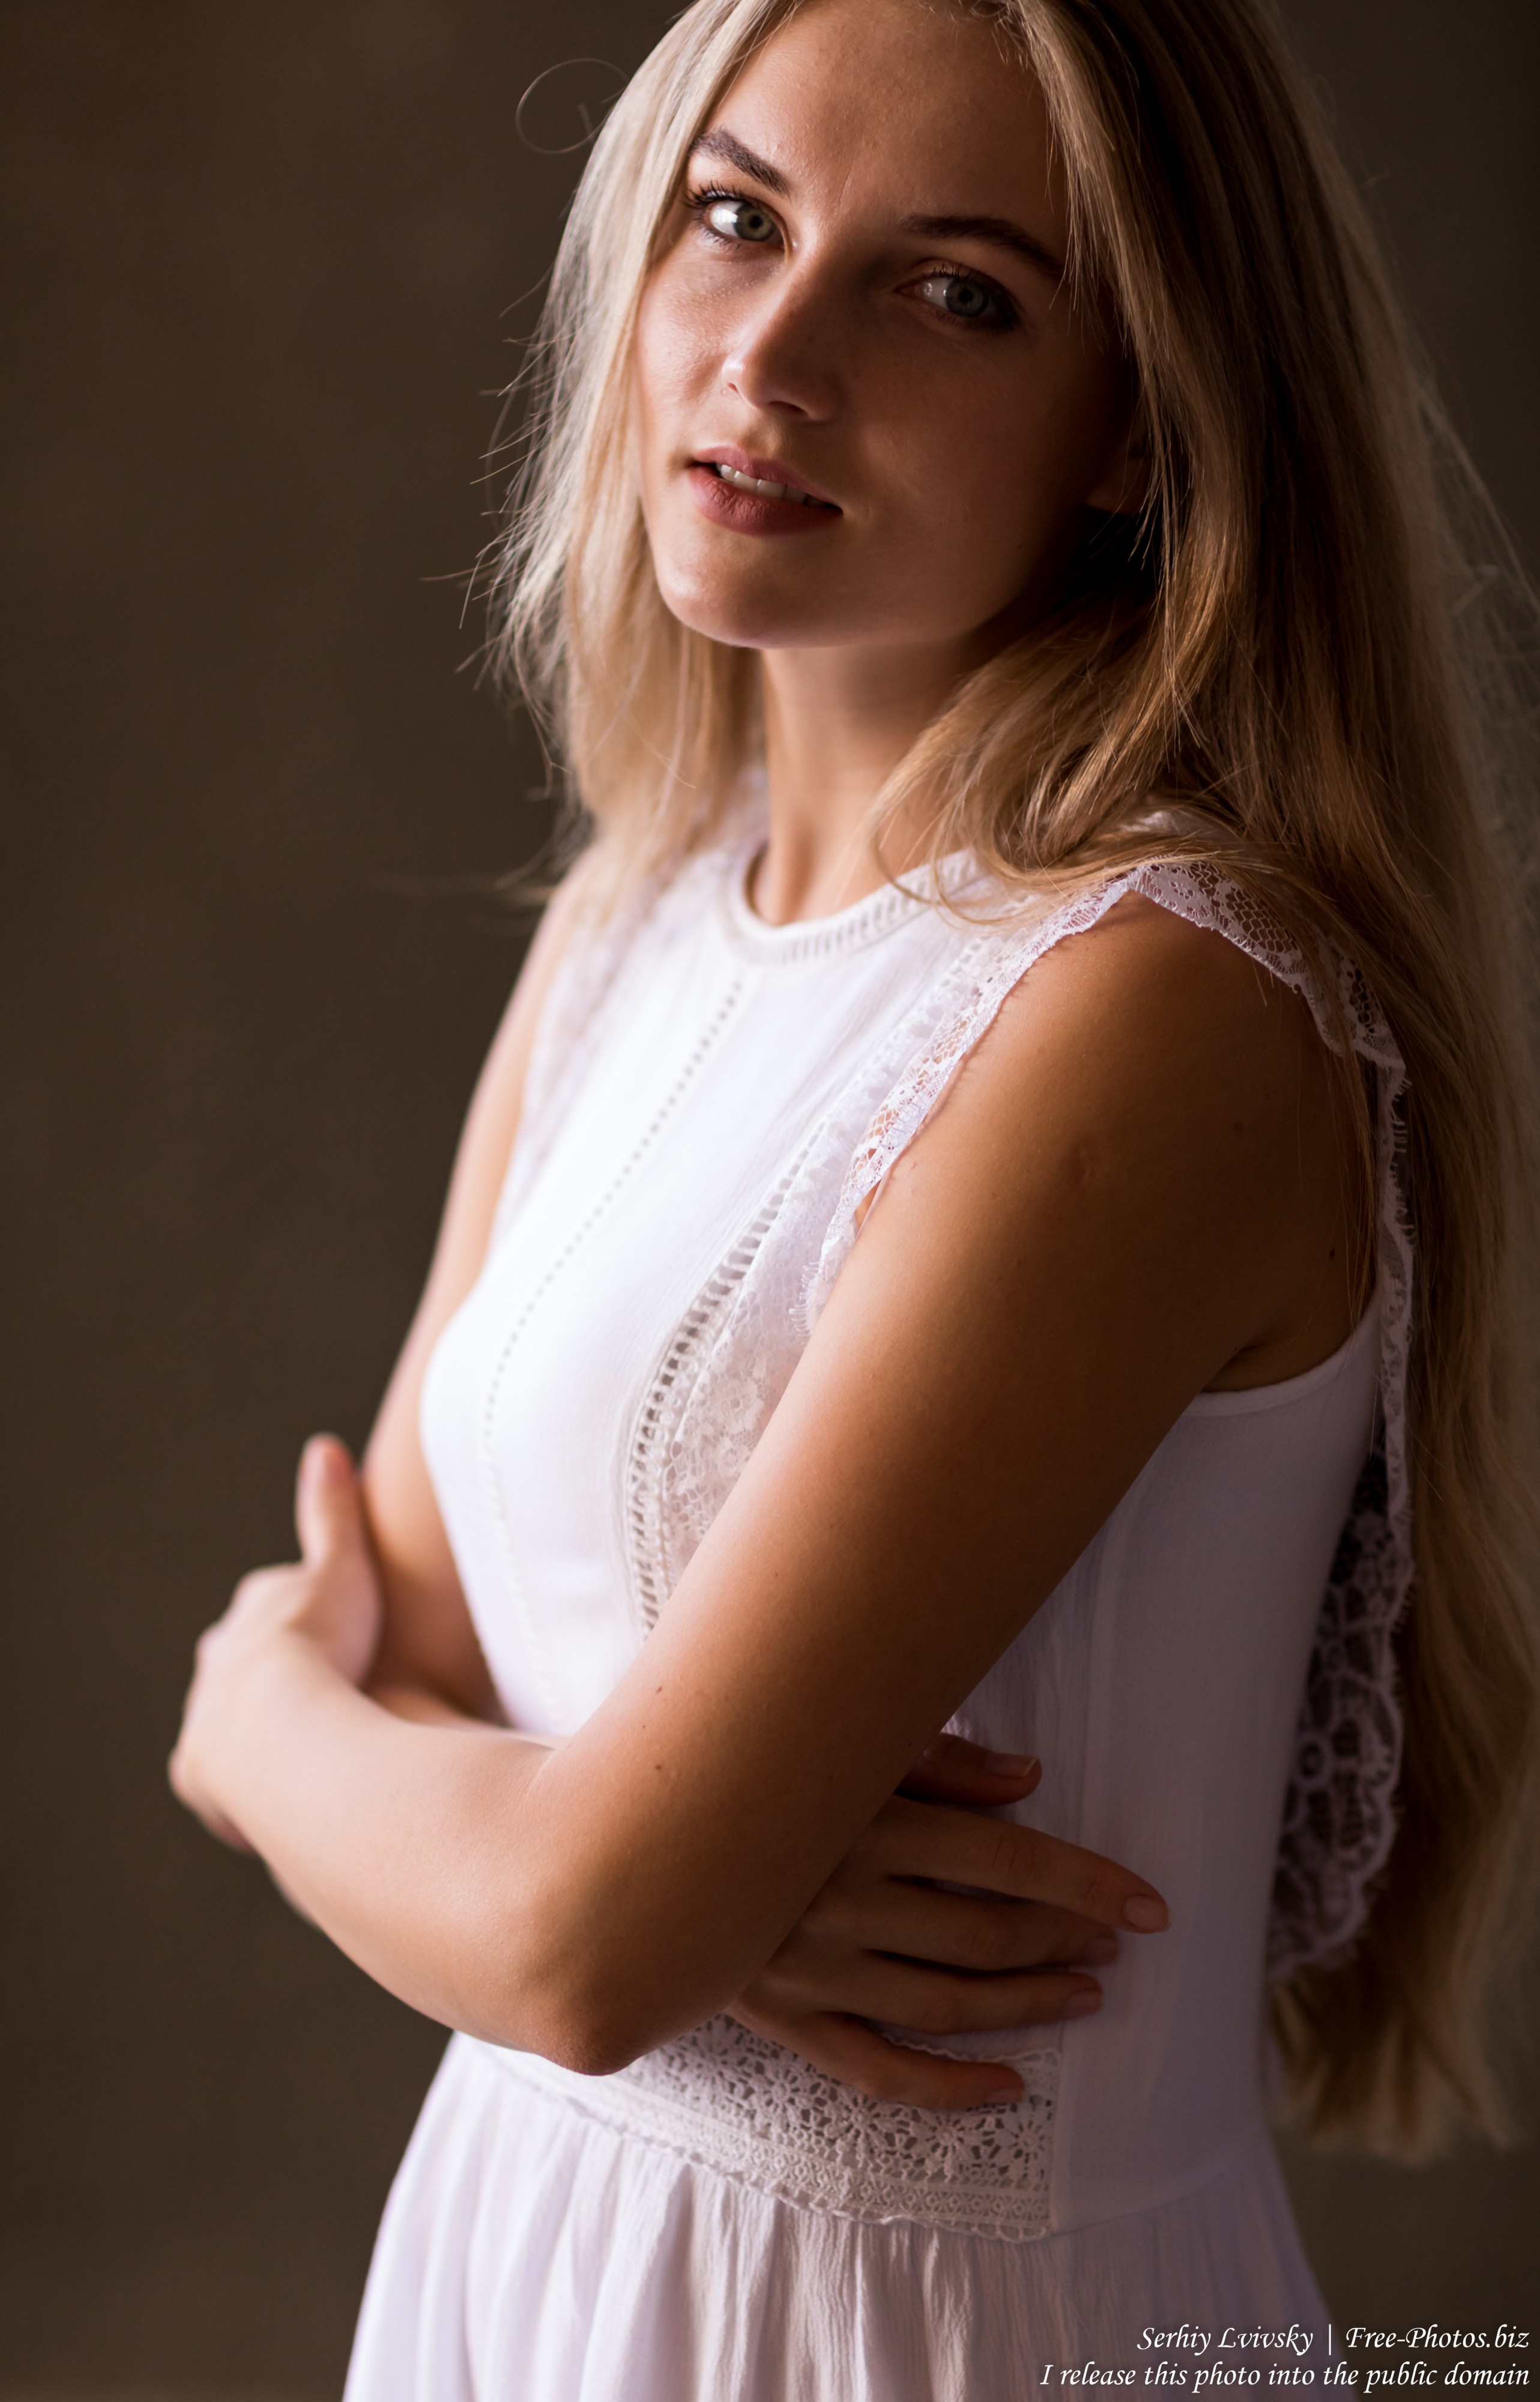 Yaryna - a 21-year-old natural blonde Catholic girl photographed in August 2019 by Serhiy Lvivsky, picture 19